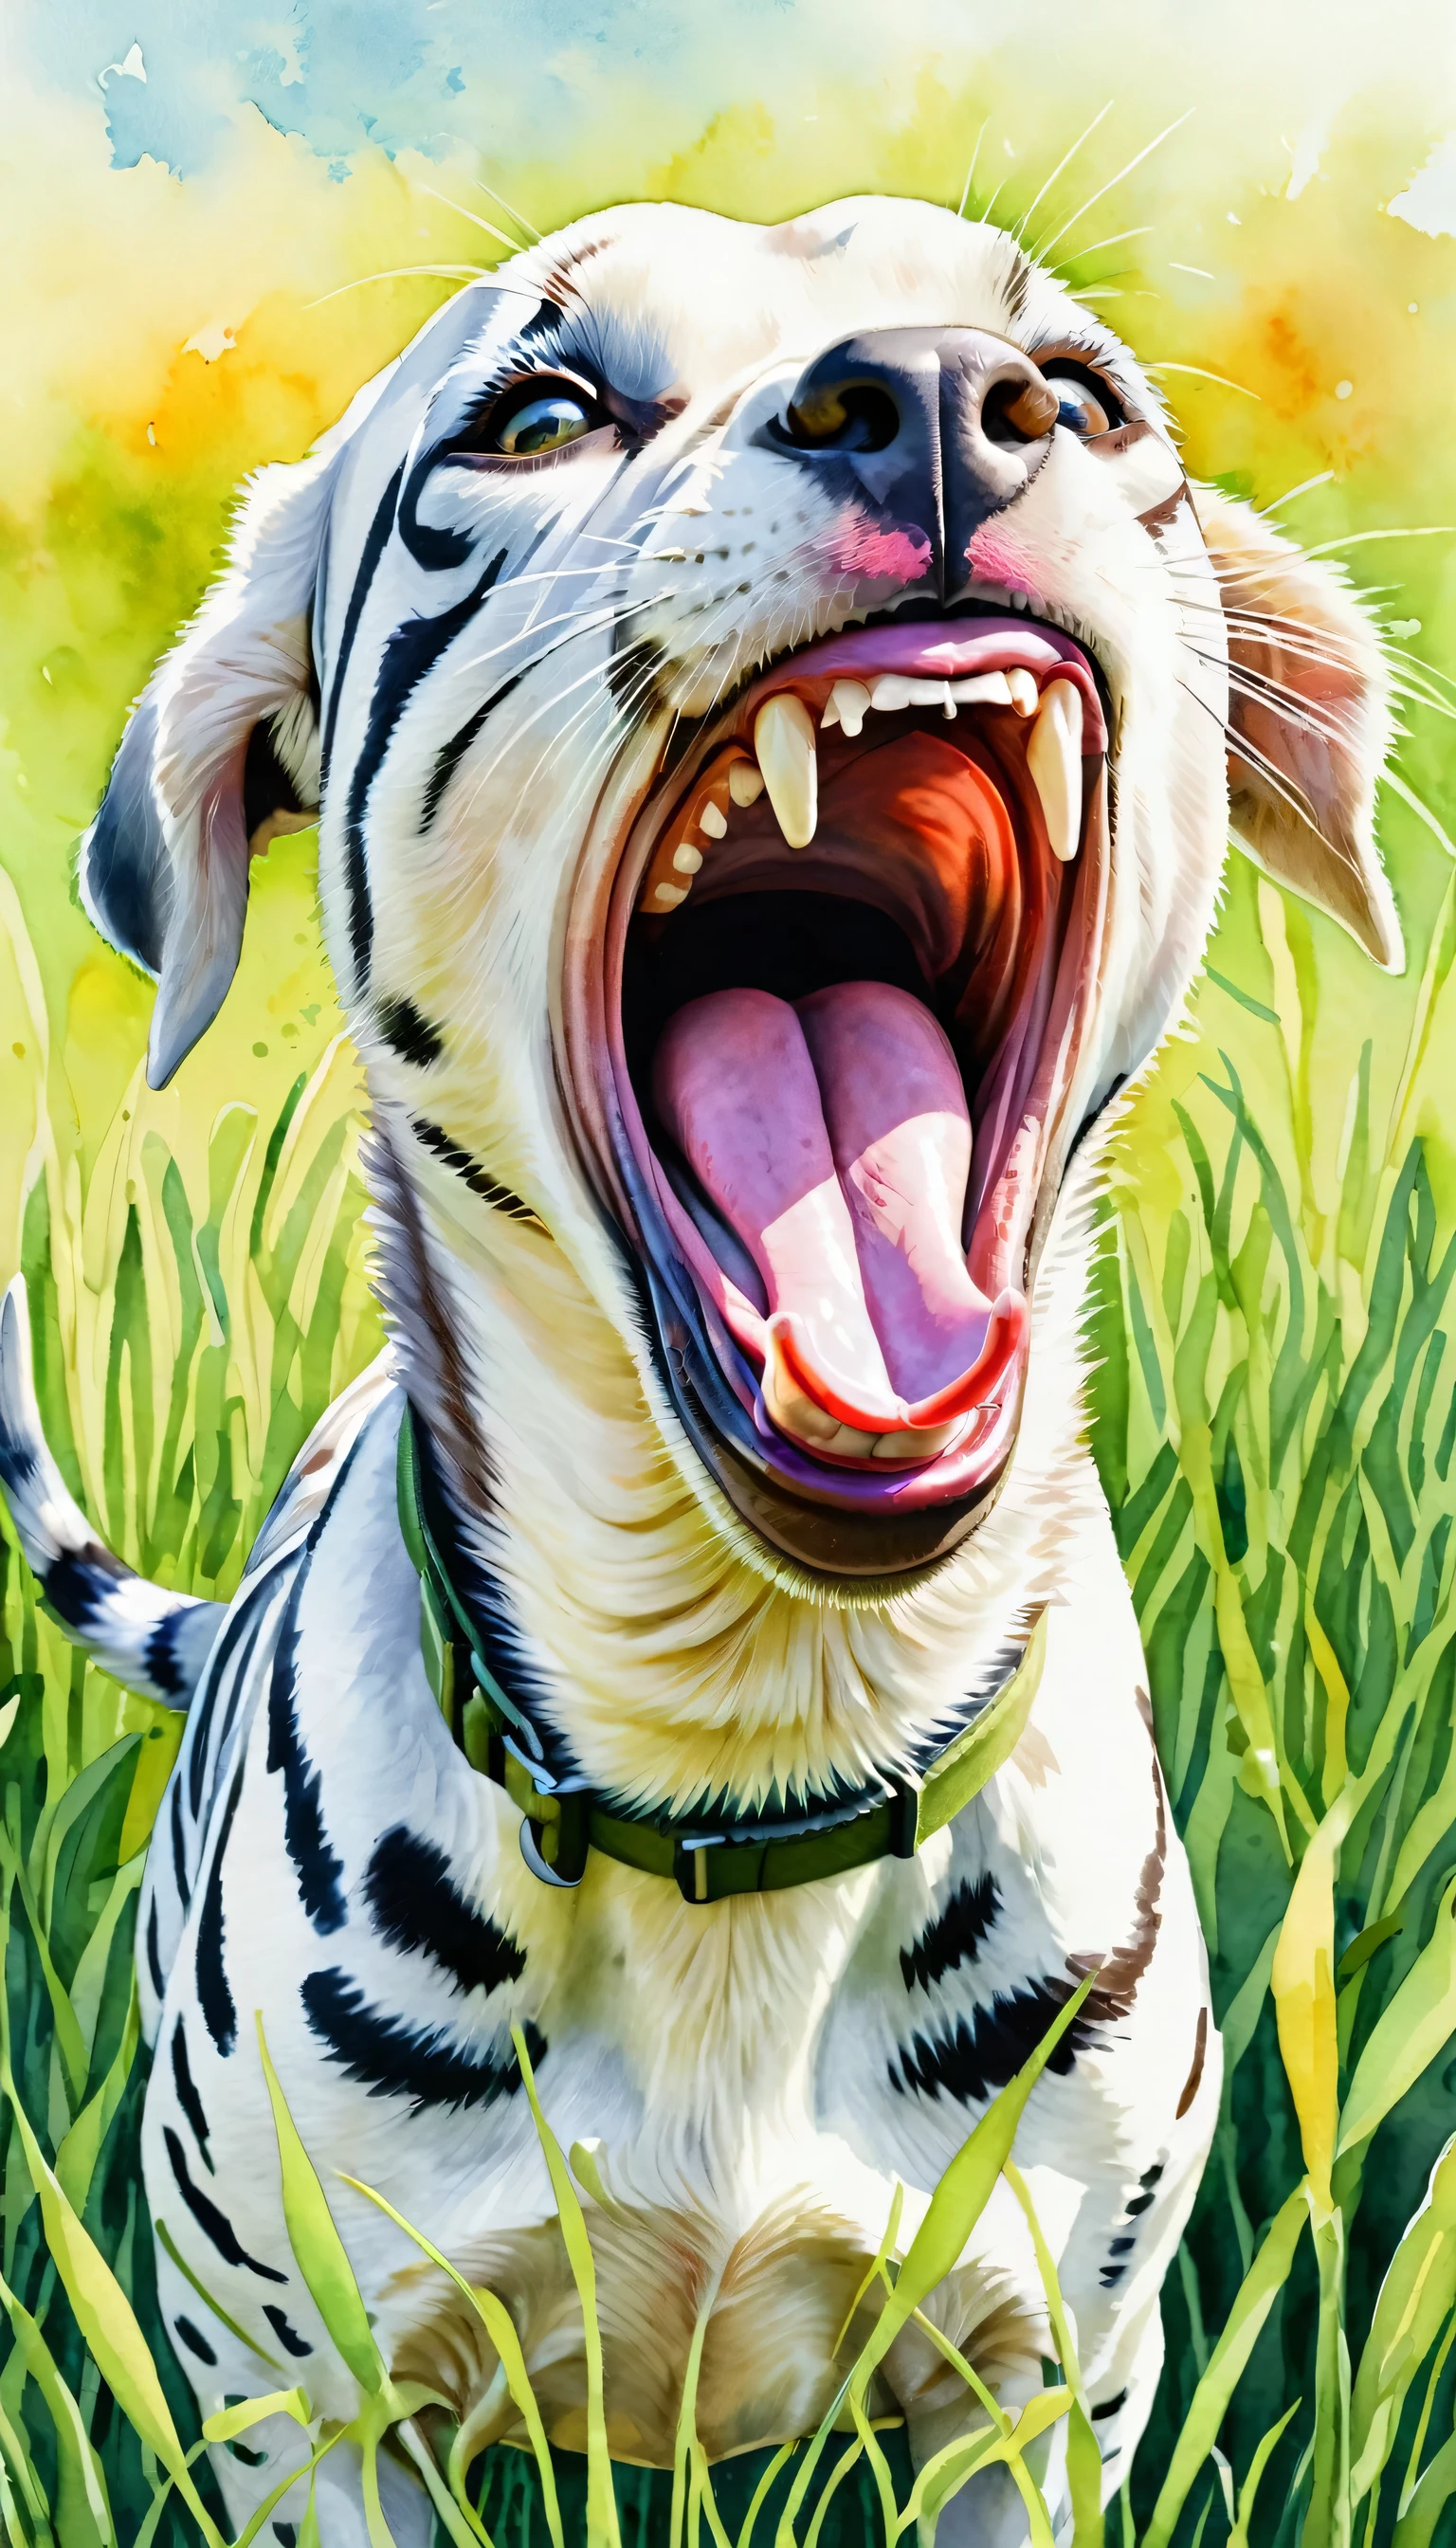 zebra with its mouth open in a grassy outdoor setting, funny, laughing, standing in a field, realistic, no_humans, tongue, animal_focus, teeth, animal, open_mouth, tongue_out, modern art style, watercolor painting, psychedelic colors